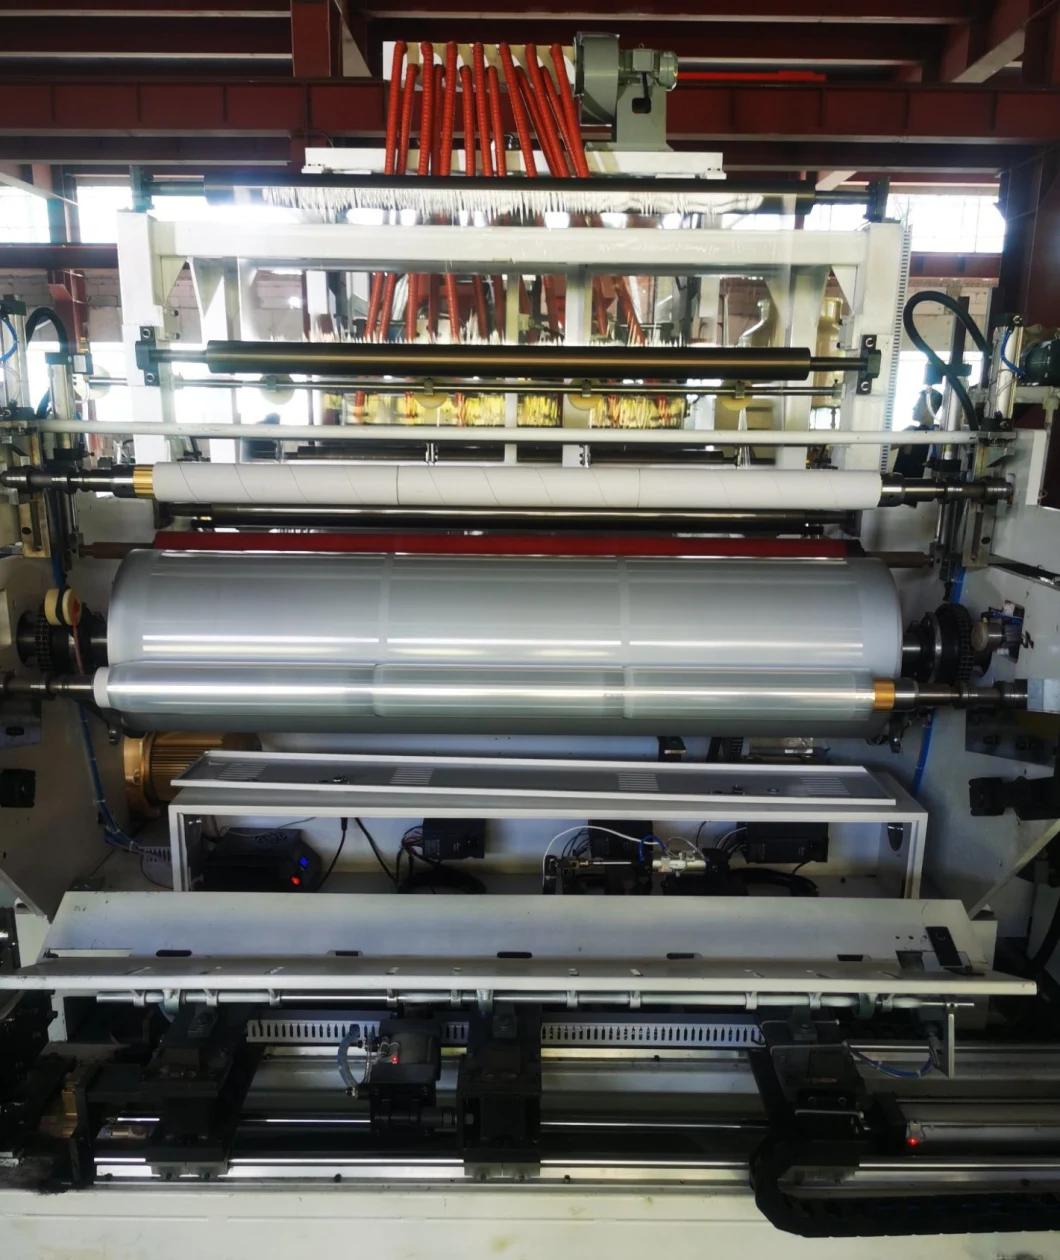 Pym Full Automatic 1500mm Three/ Five Layers Cast LDPE LLDPE Stretch Film Machine Extrusion Line